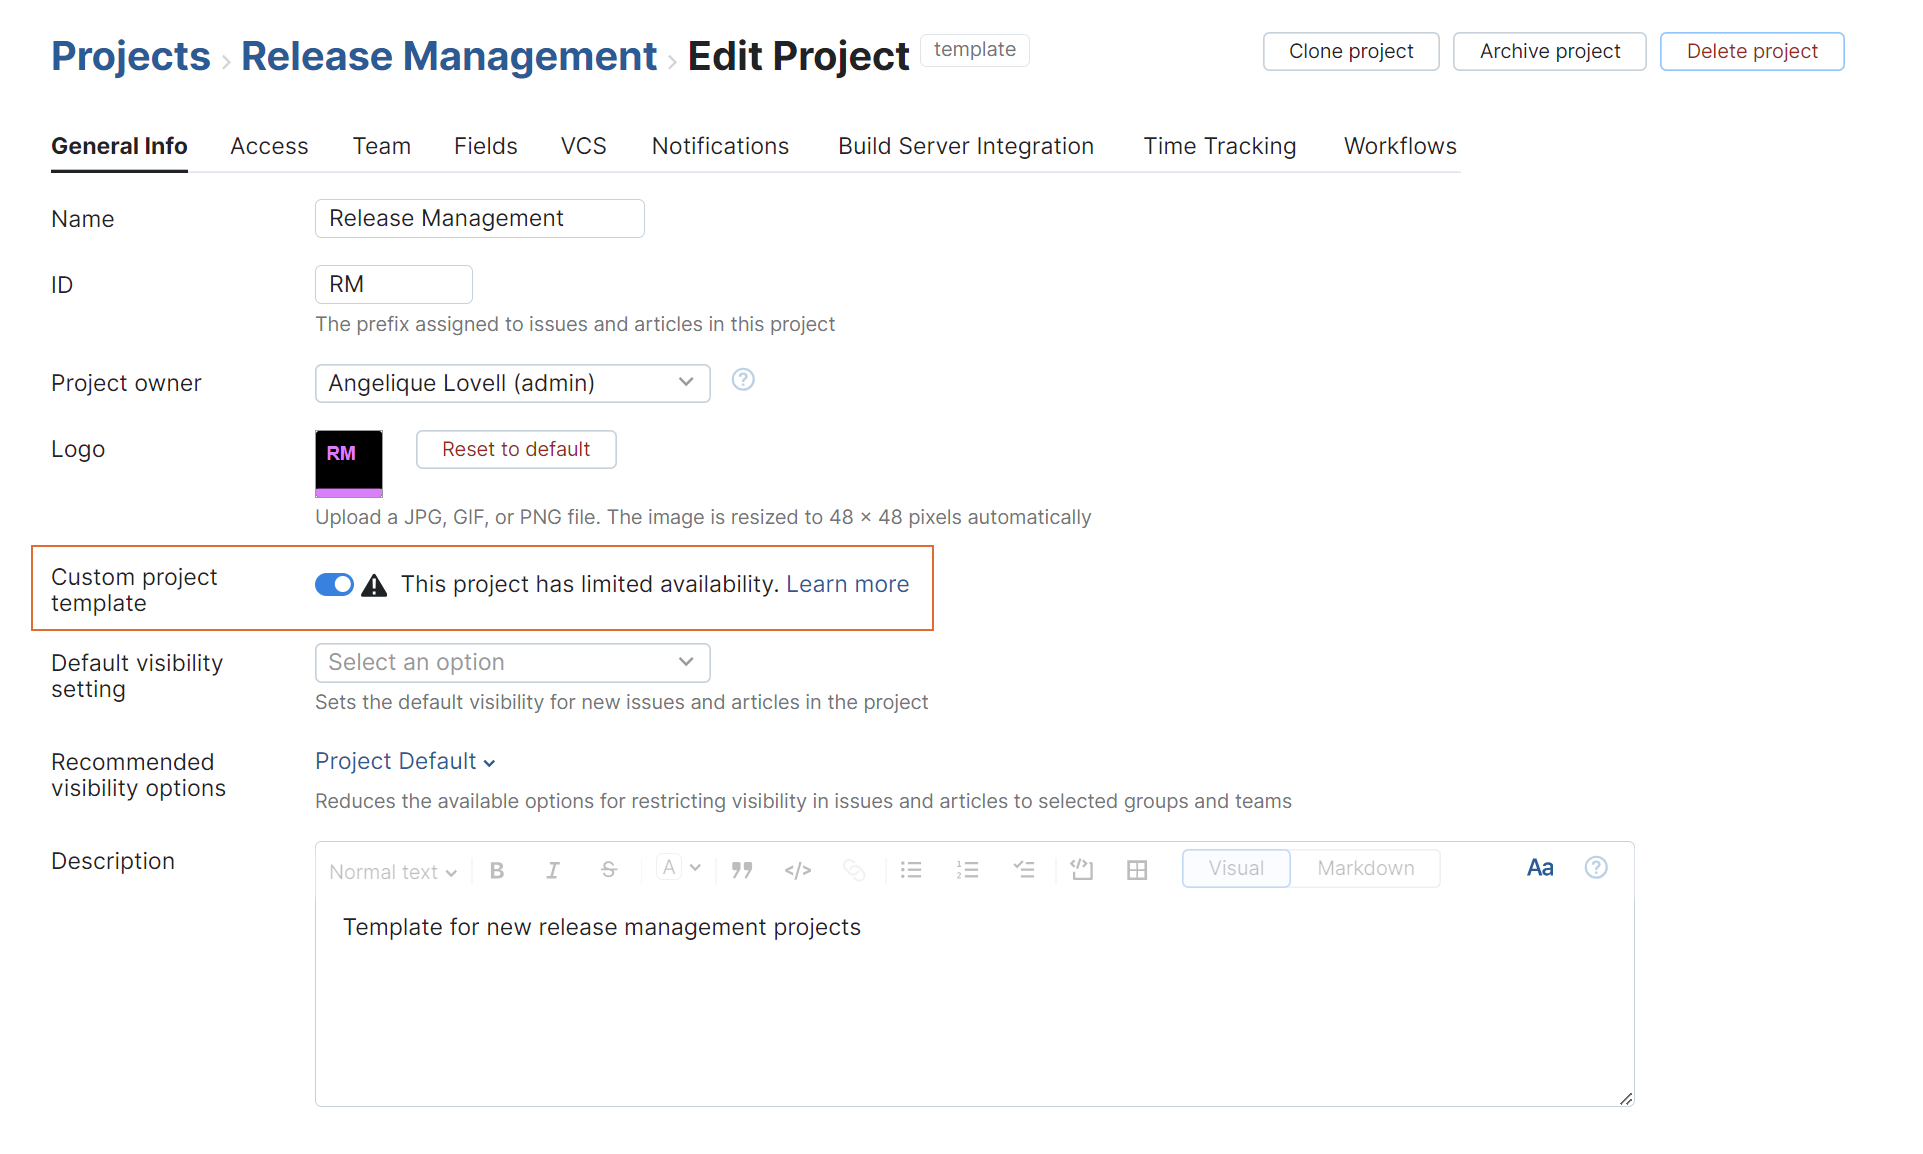 enable custom project template option